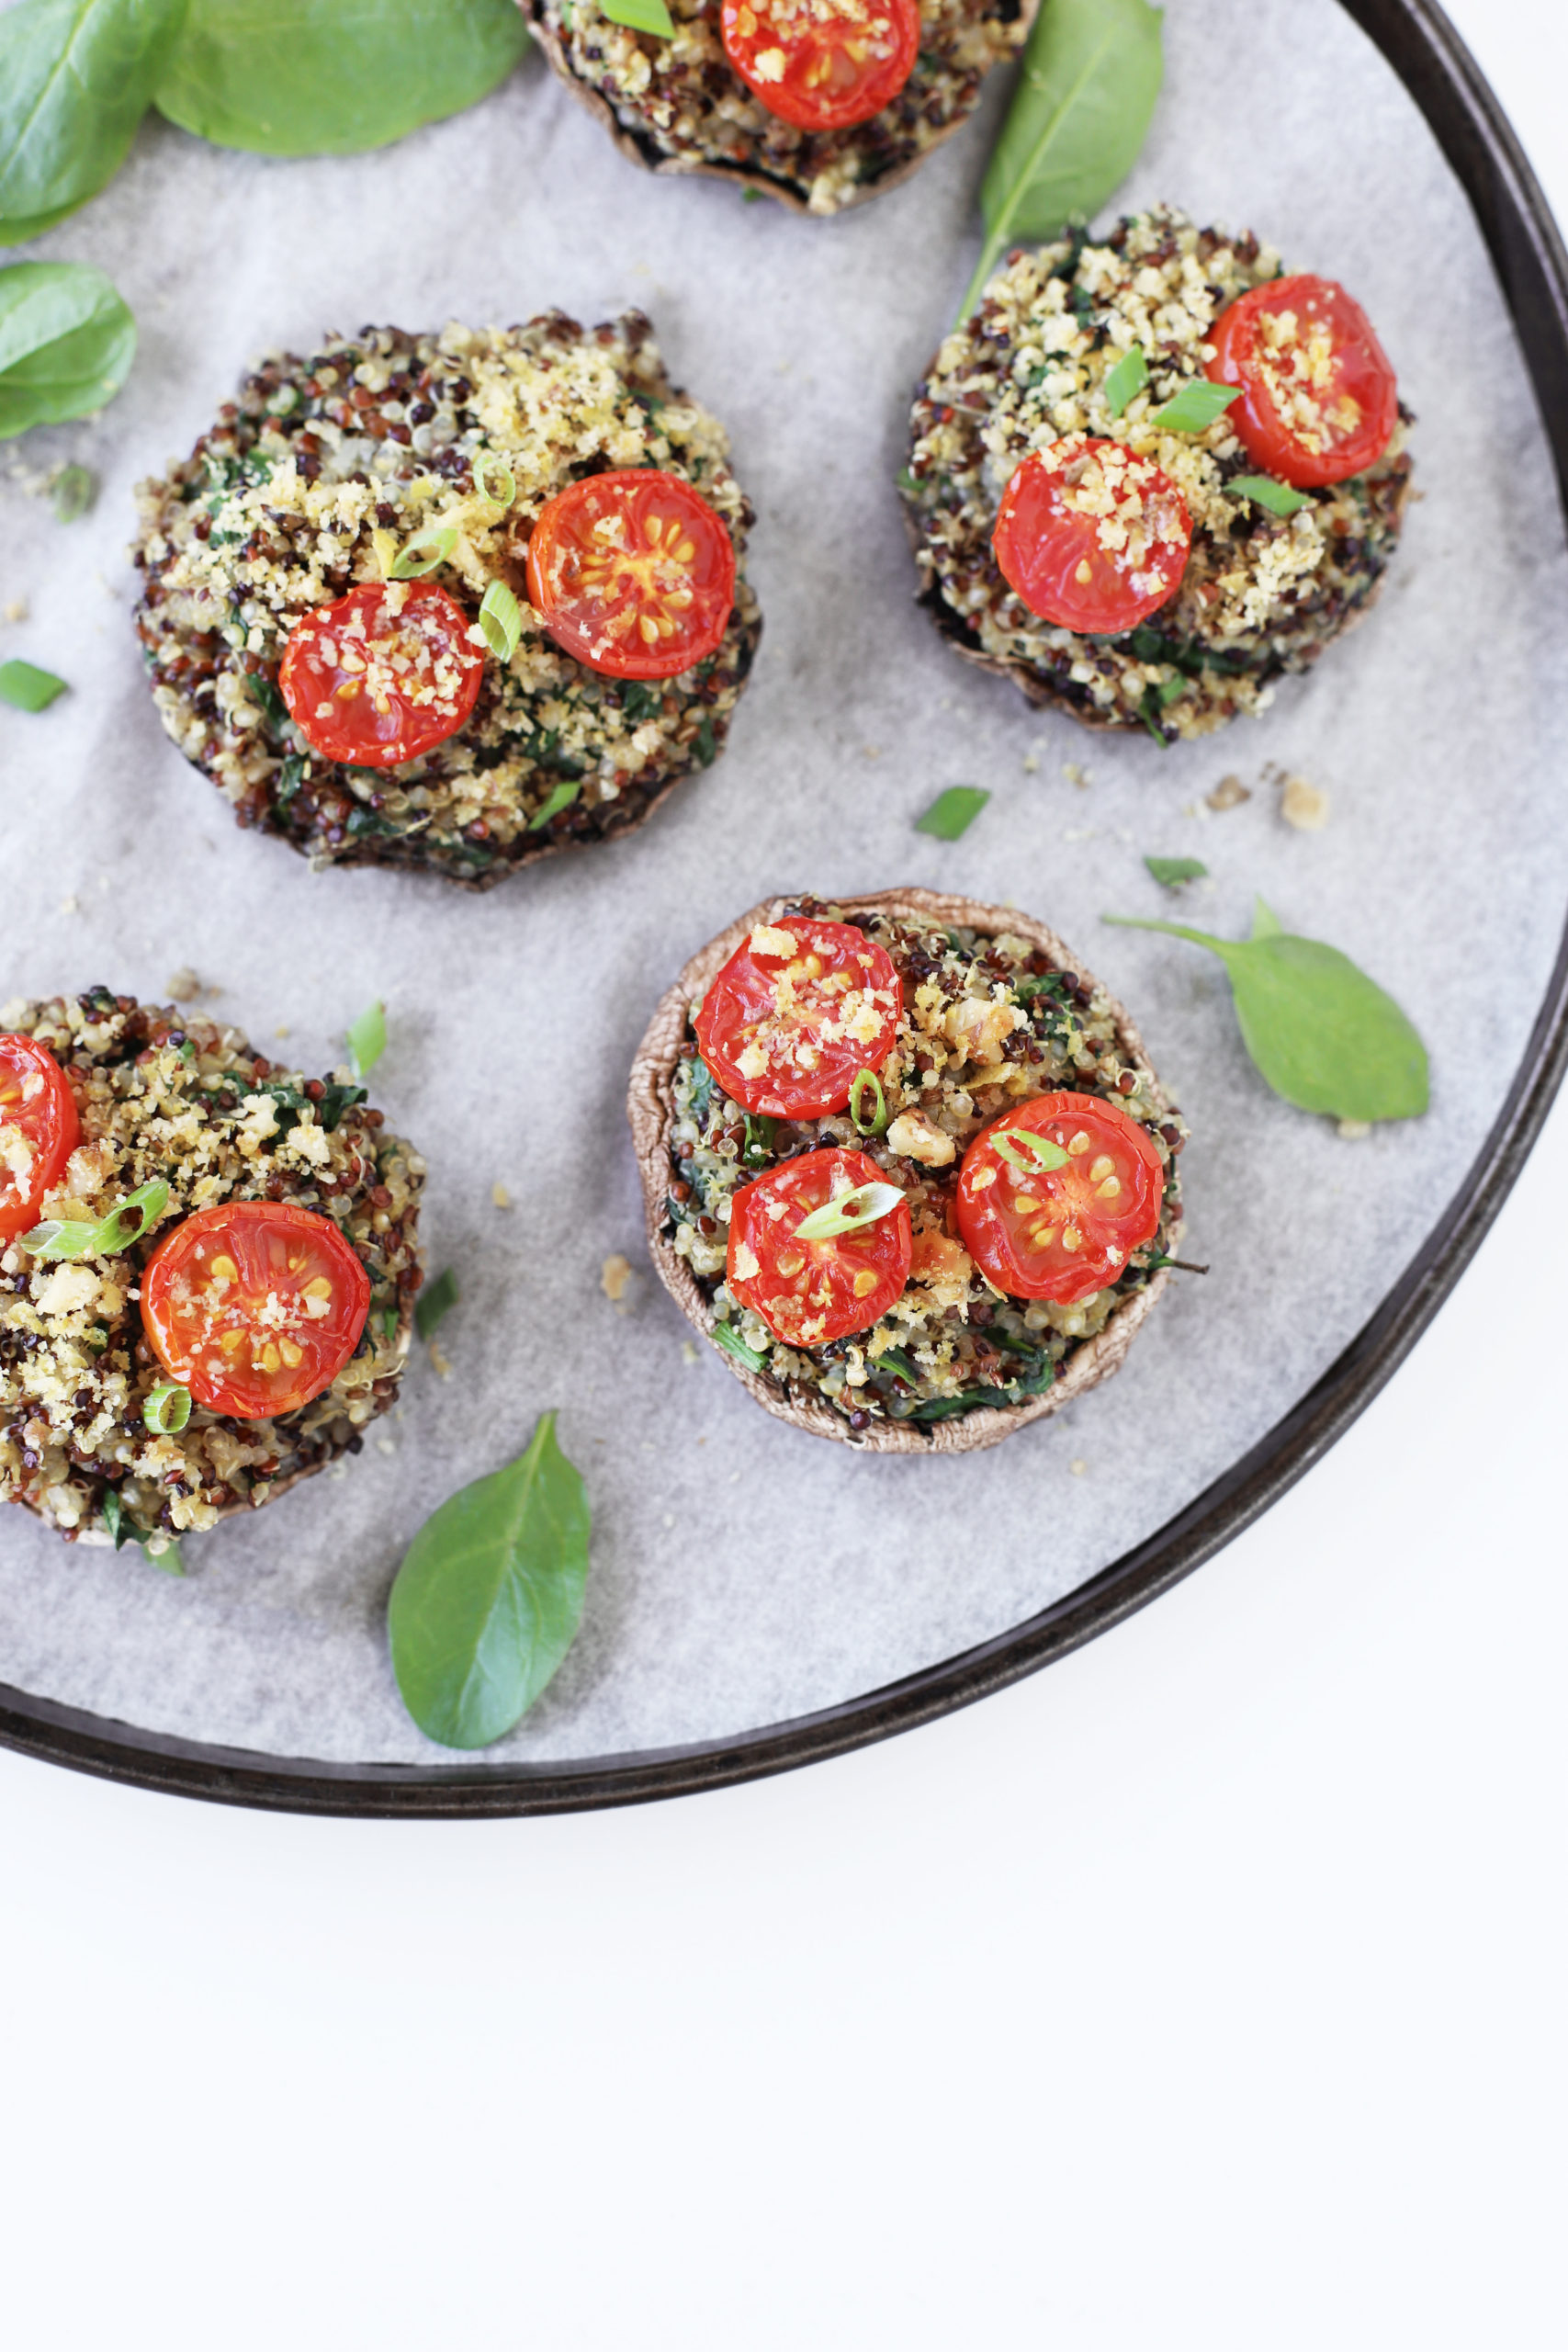 Baked vegetarian stuffed portobello mushrooms filled with quinoa, spinach, roasted tomatoes and herbs with a crunchy walnut parmesan crumble topping, lying on a baking tray.